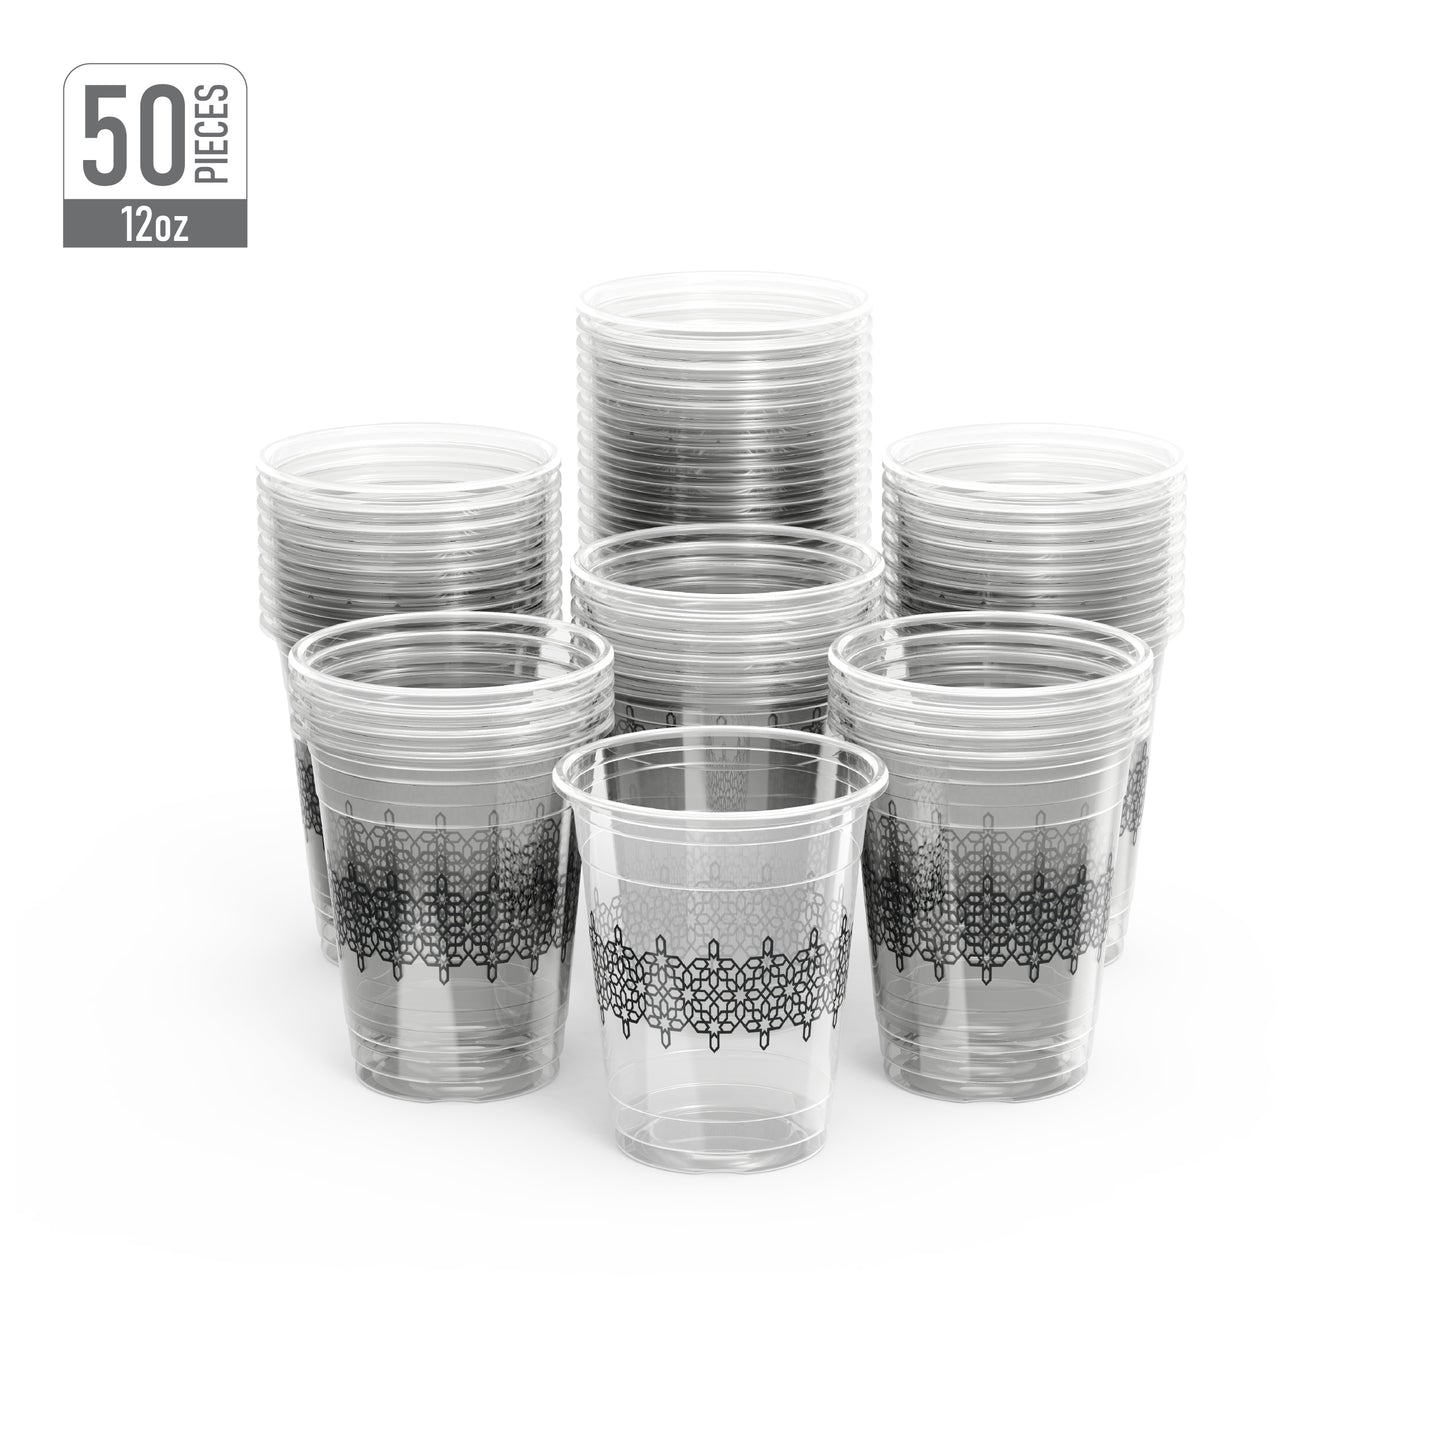 12 oz Clear Plastic Cups with Ethnic Patterns Print Pack of 10